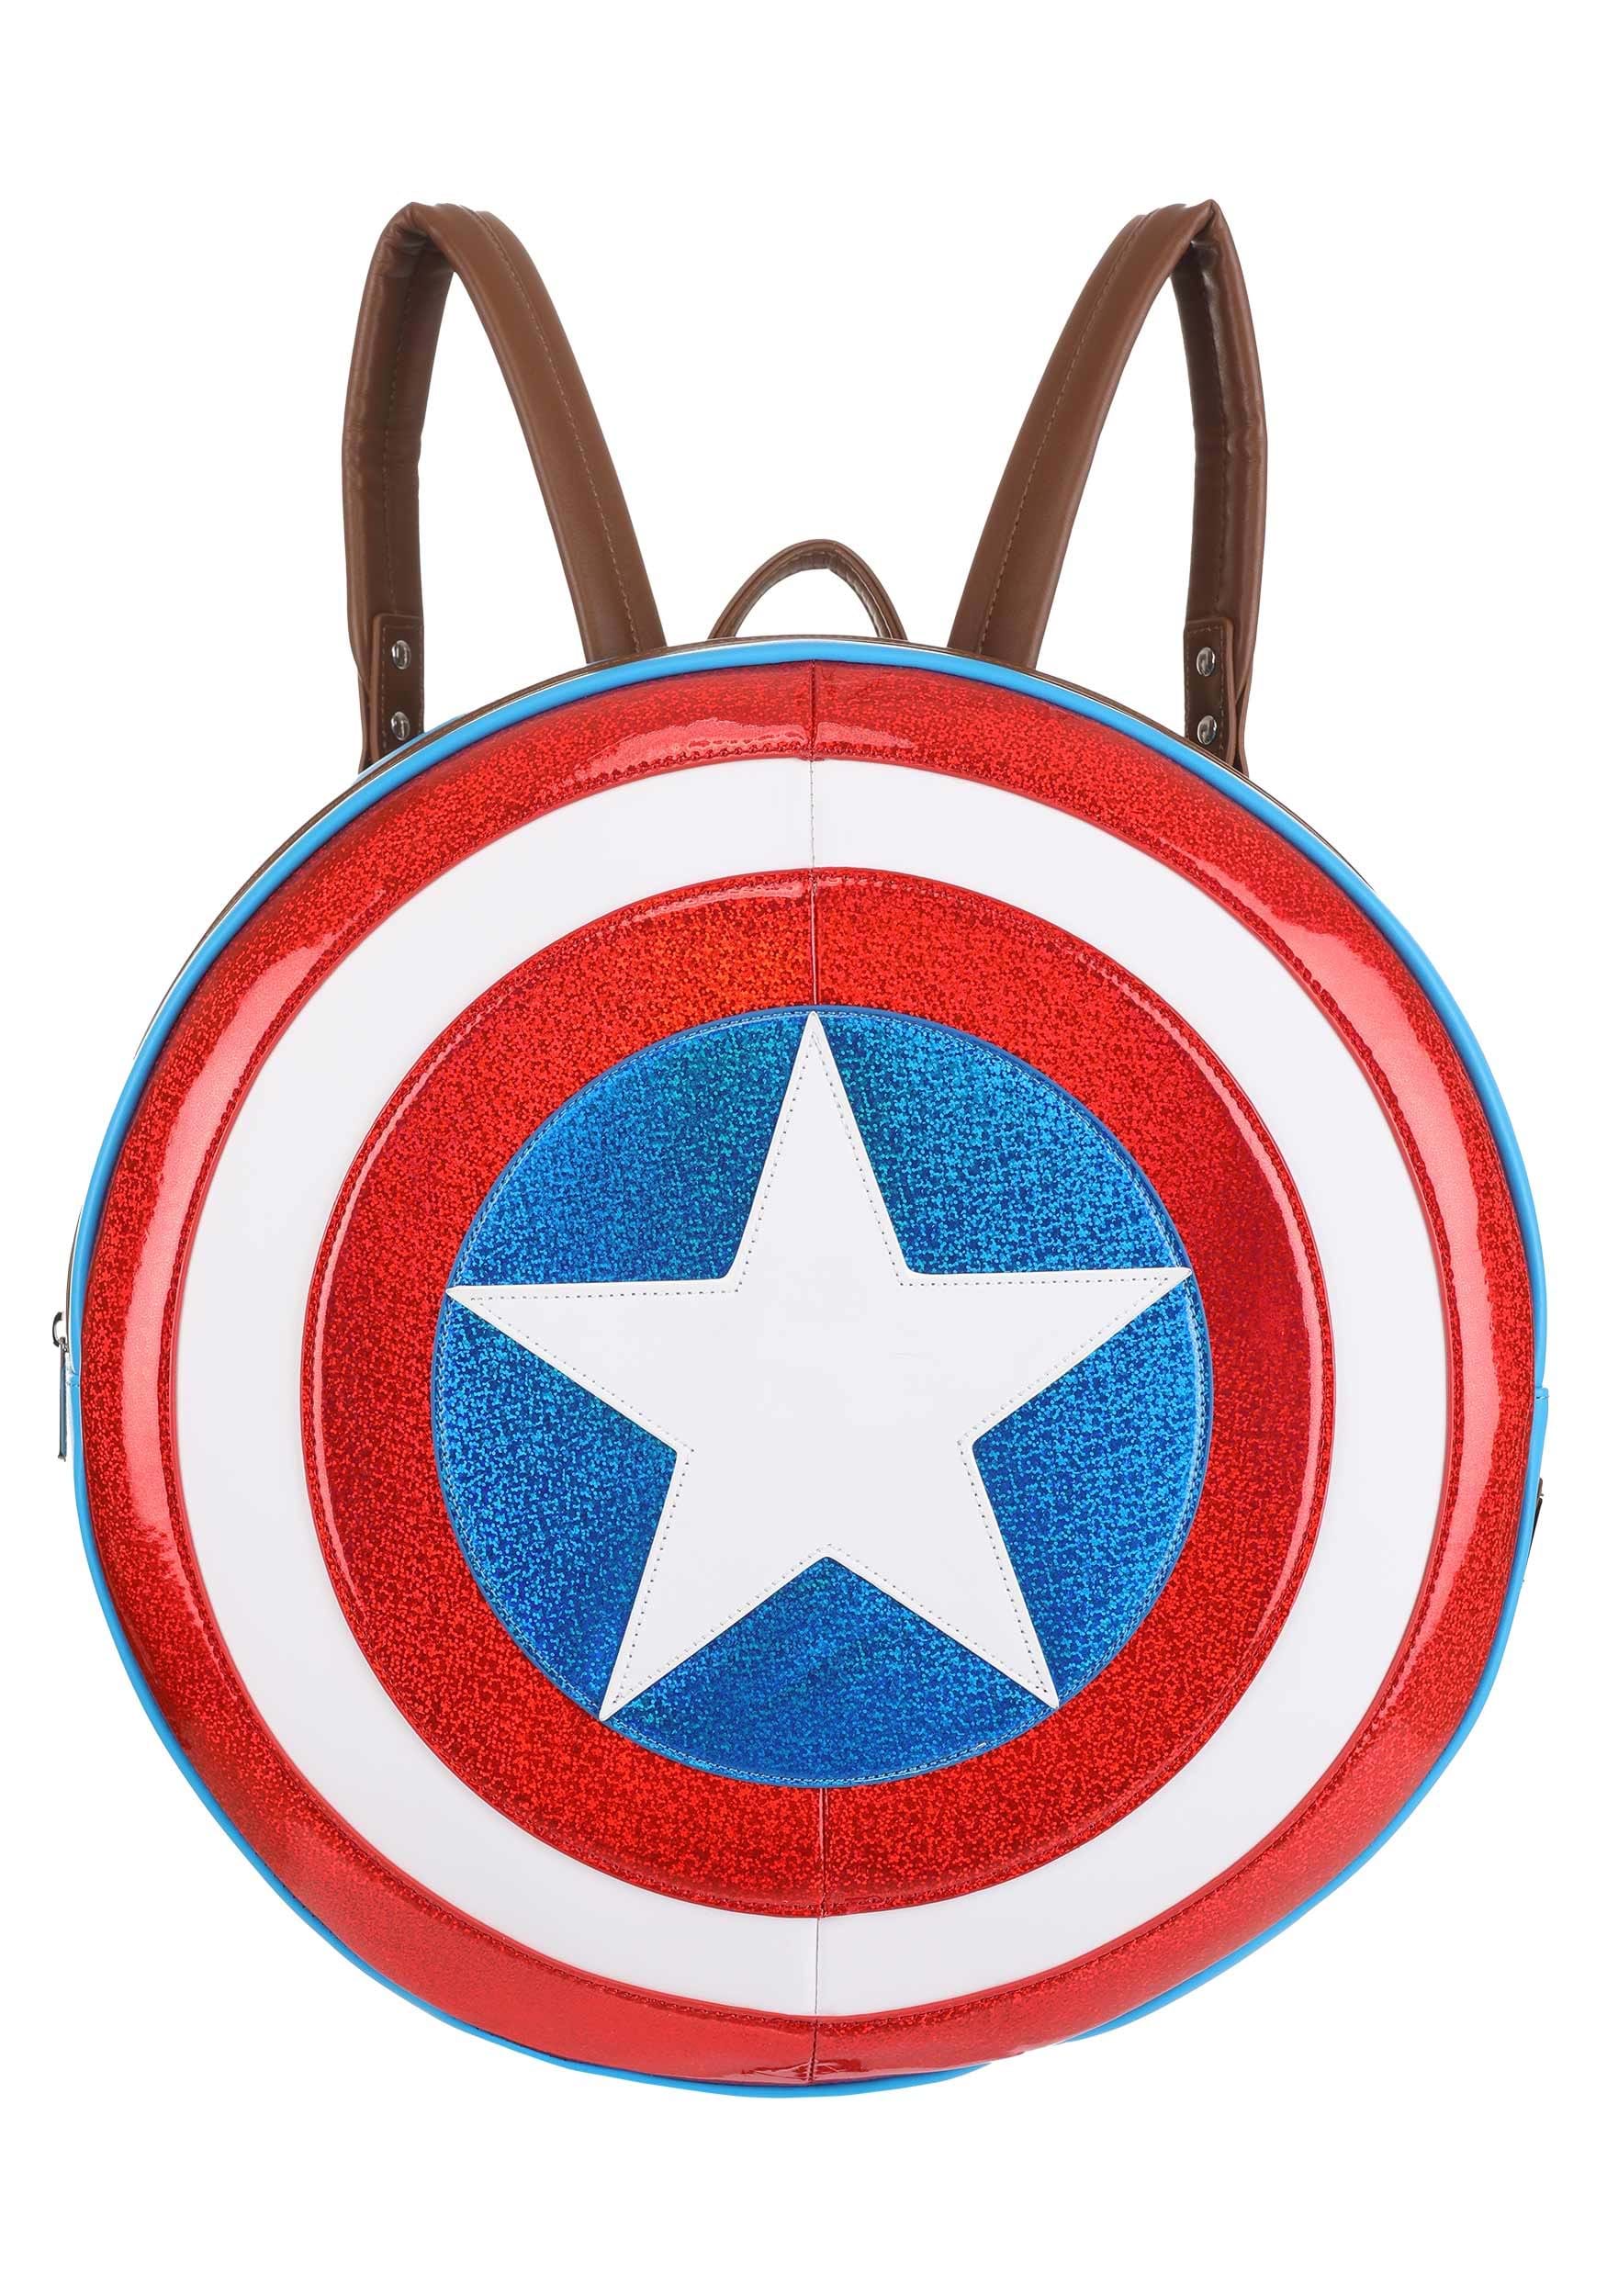 Image of Loungefly Captain America Shield Backpack ID LFMVBK0247-ST